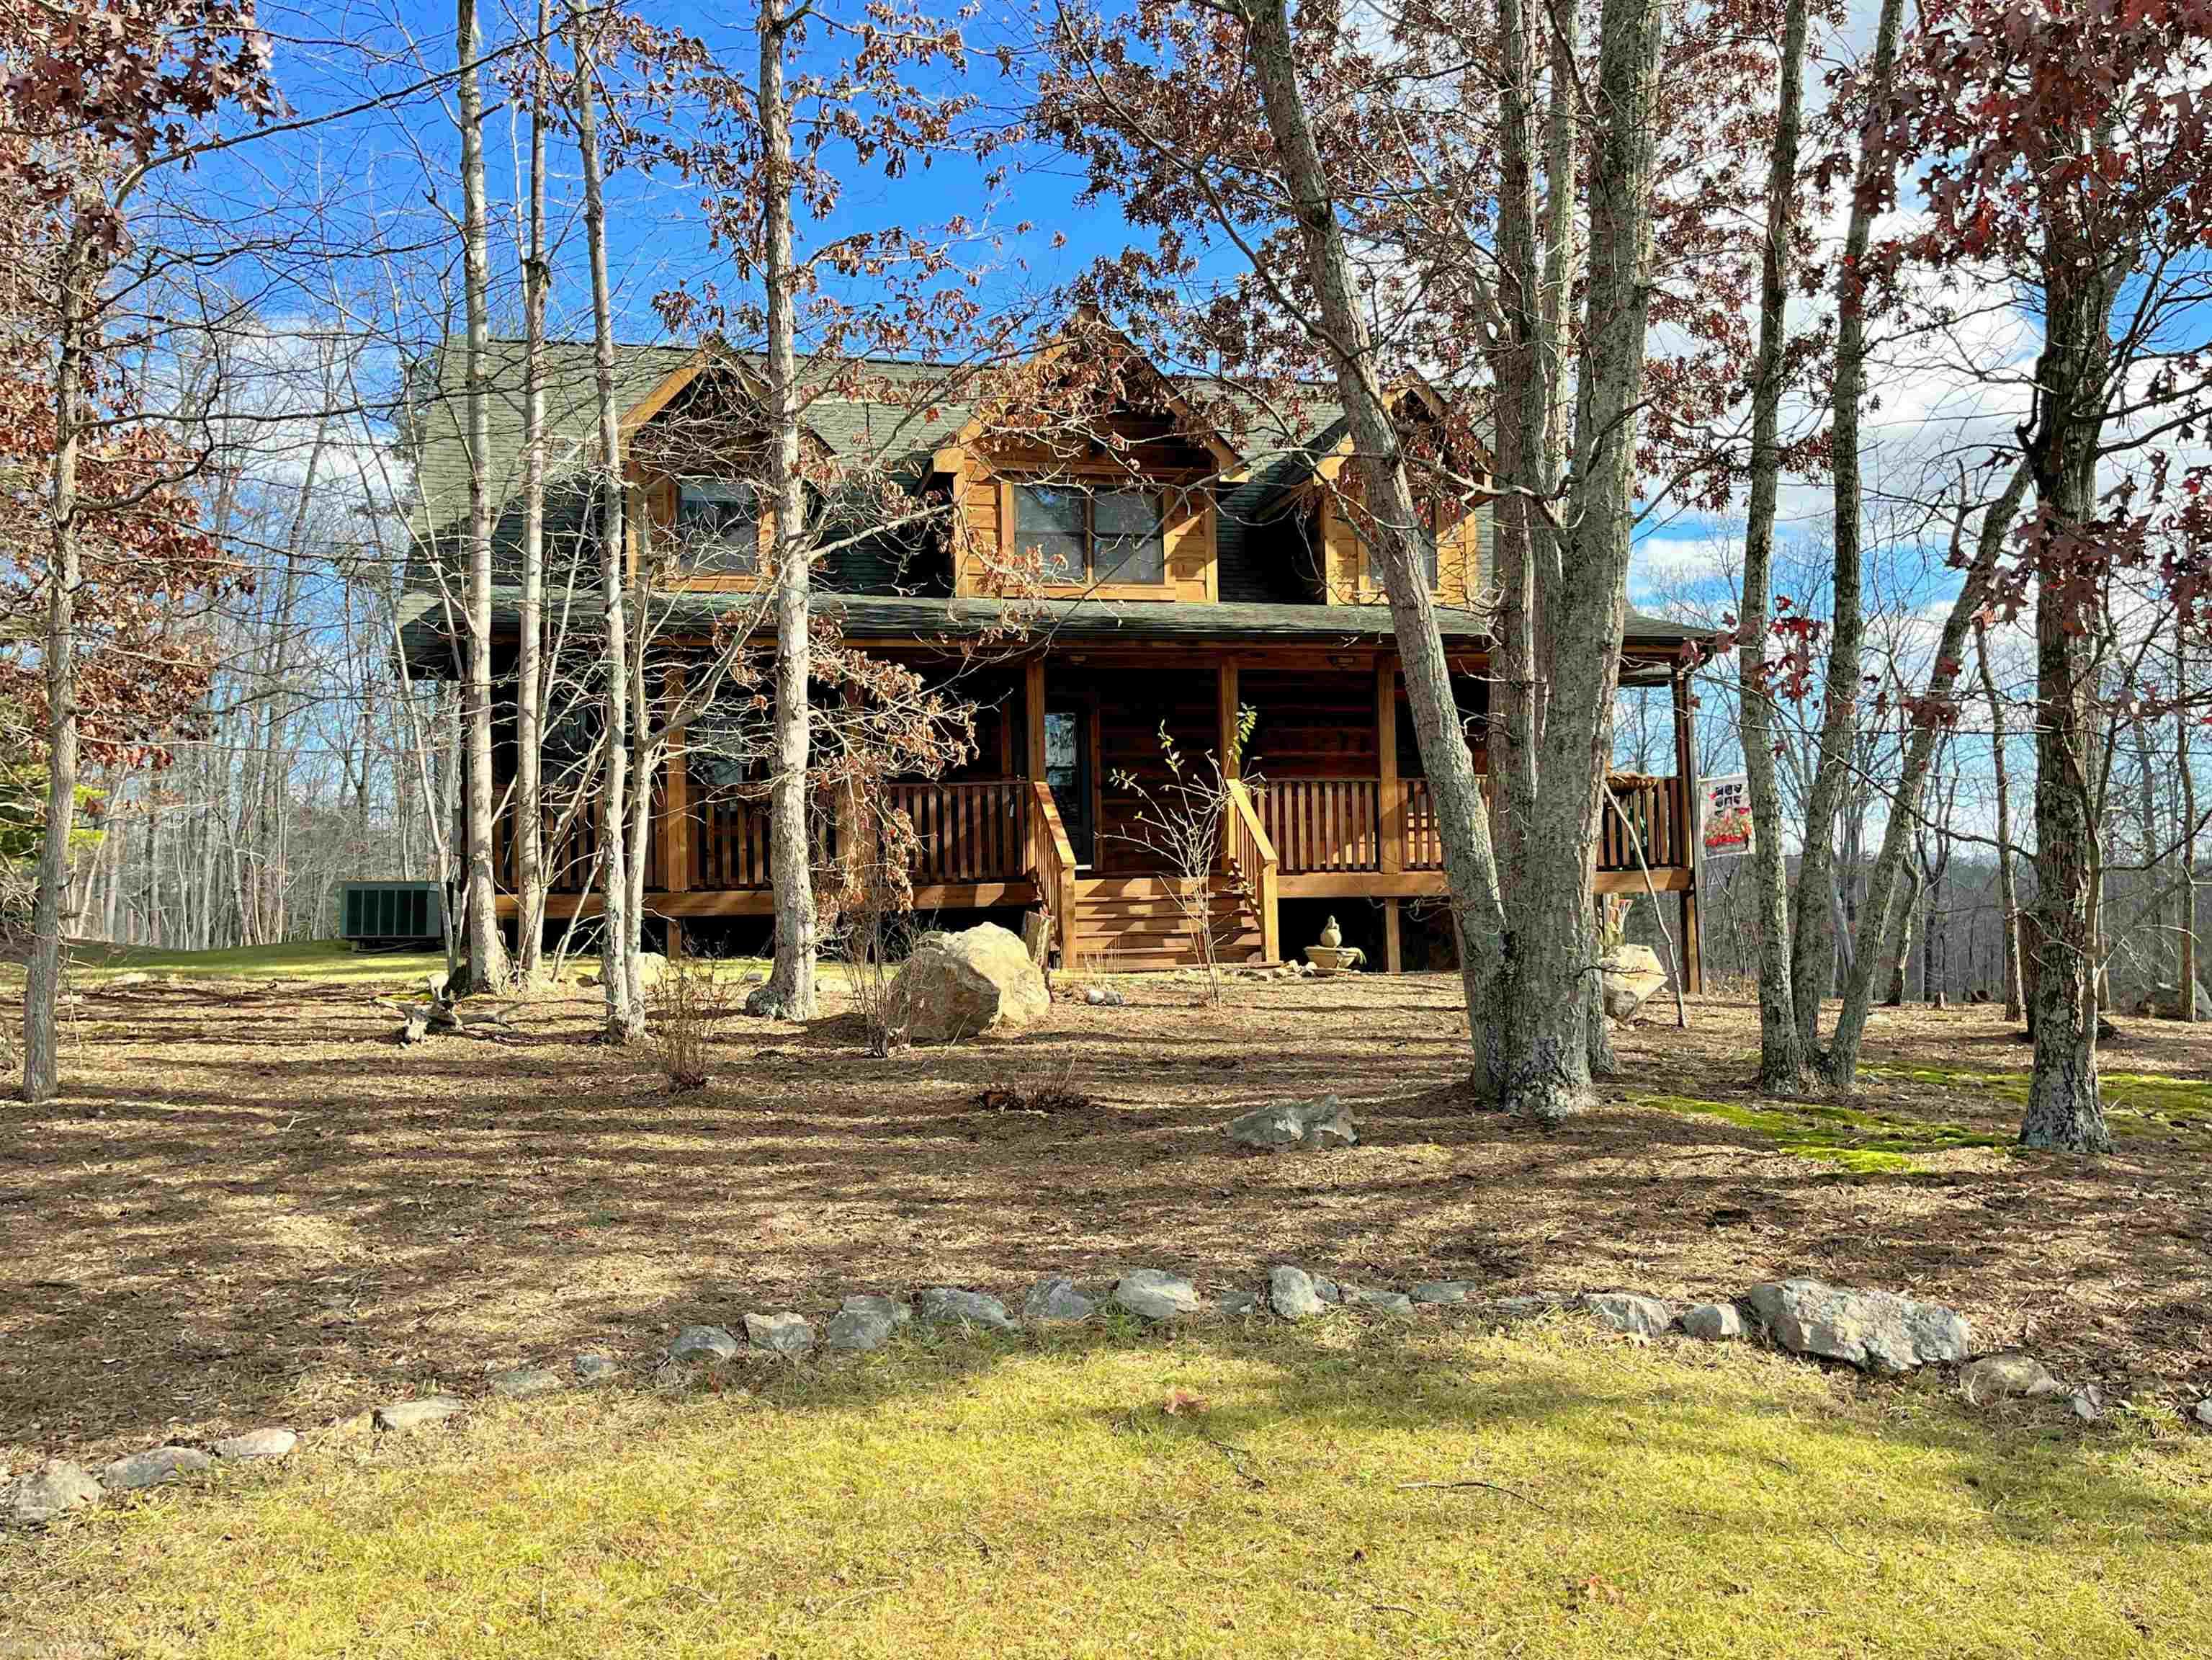 Magnificent 3 bedroom, 2 full & 2 half bath log home on a very private 1 acre lot w/ mountain views, located w/in minutes to NRV Mall, 460 Bypass, Radford University & an easy commute to Blacksburg & Virginia Tech. Enjoy the sunsets from the covered, rocking chair, front porch overlooking a wooded front yard & the rear deck has an open view of the enormous back & side yard. Enjoy your morning coffee in the screened in porch just off the eat-in kitchen w/ built-in corner cabinet & updated appliances (2021). The light pours in thru the wall of windows in the living room w/ enormous vaulted ceilings & a stone fireplace. The Main Level, Primary Bedroom has a separate entrance to the rear deck & the bathroom has a walk-in closet, double vanity & separate shower & tub. Office on main level could be used as a 4th bedroom & 2 spacious bedrooms upstairs. The full, finished basement has a wet bar & half bath perfect for game room or den. This home is freshly painted & move-in ready!